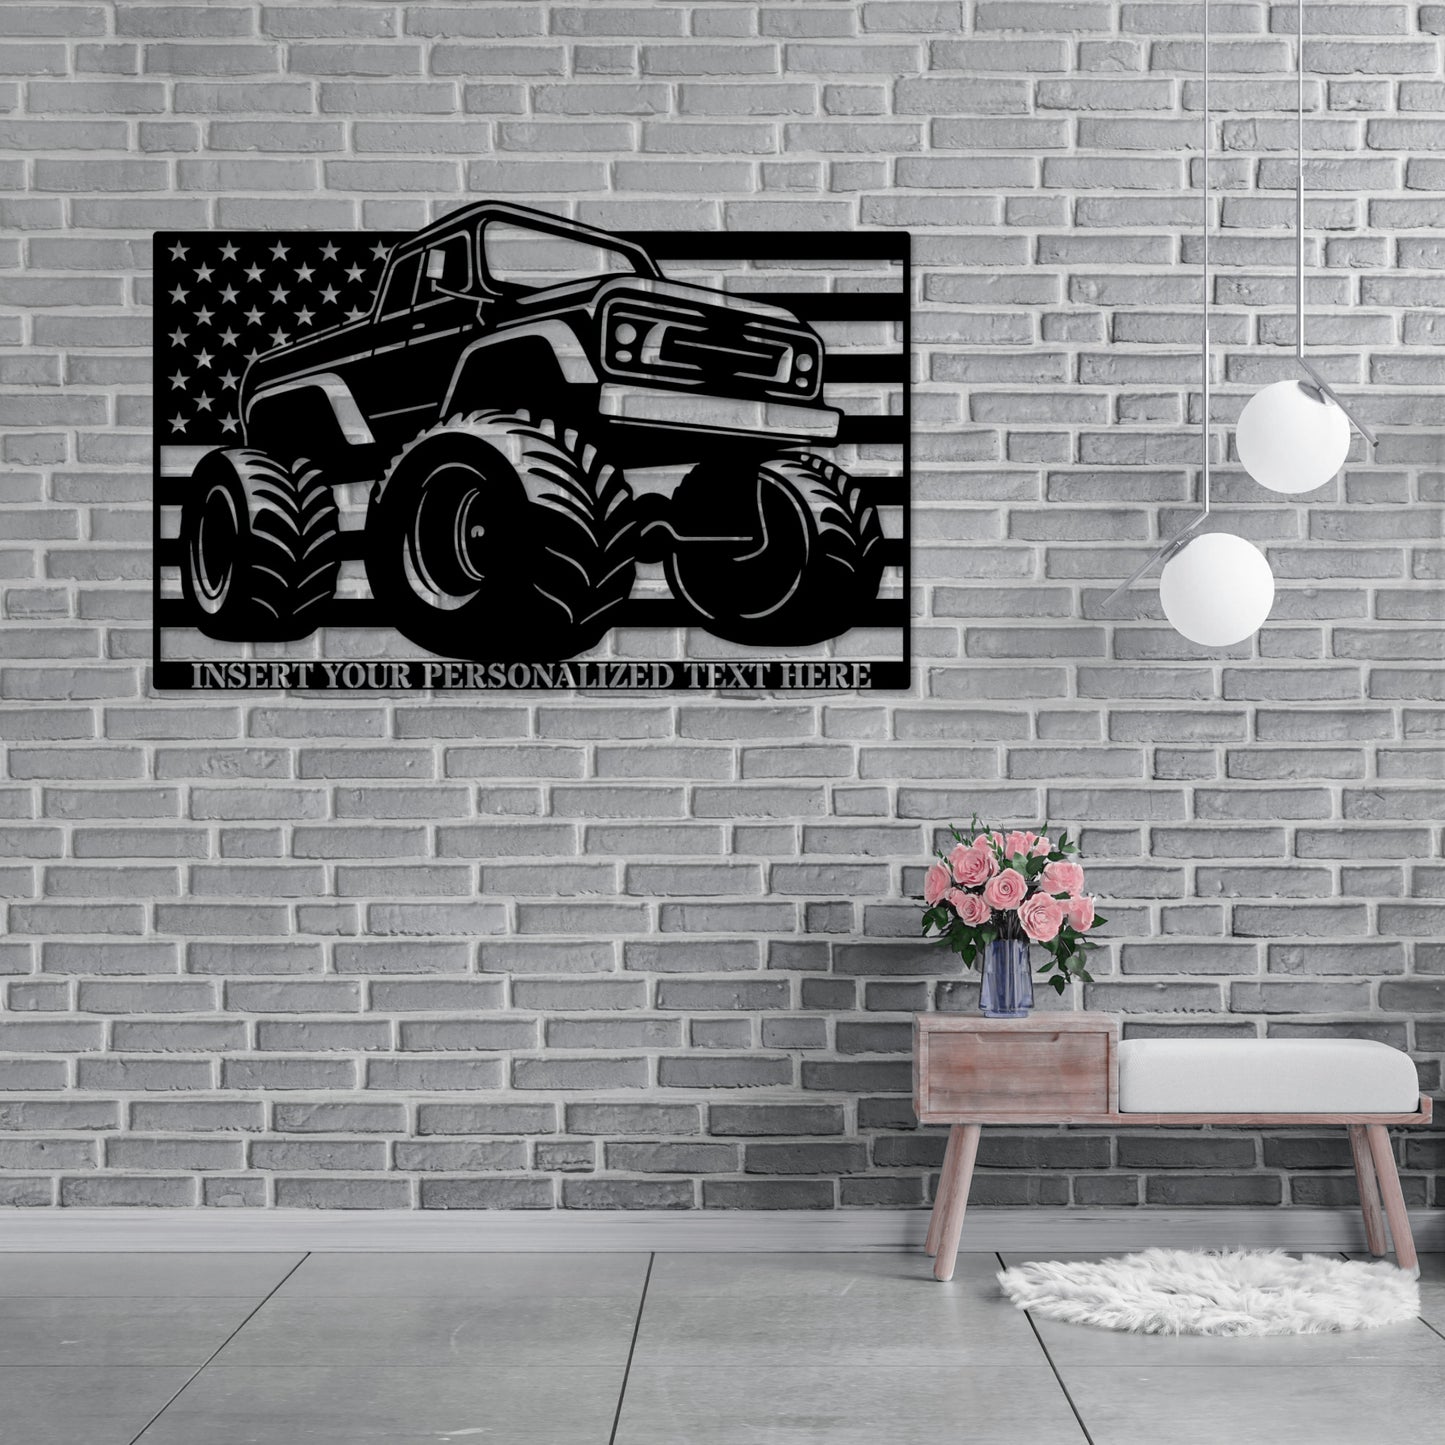 Personalized Monster Truck Name Metal Sign. Custom American Pickup Truck Wall Decor. Gift For Mechanic. Garage Shop Wall Hanging. Auto Decor